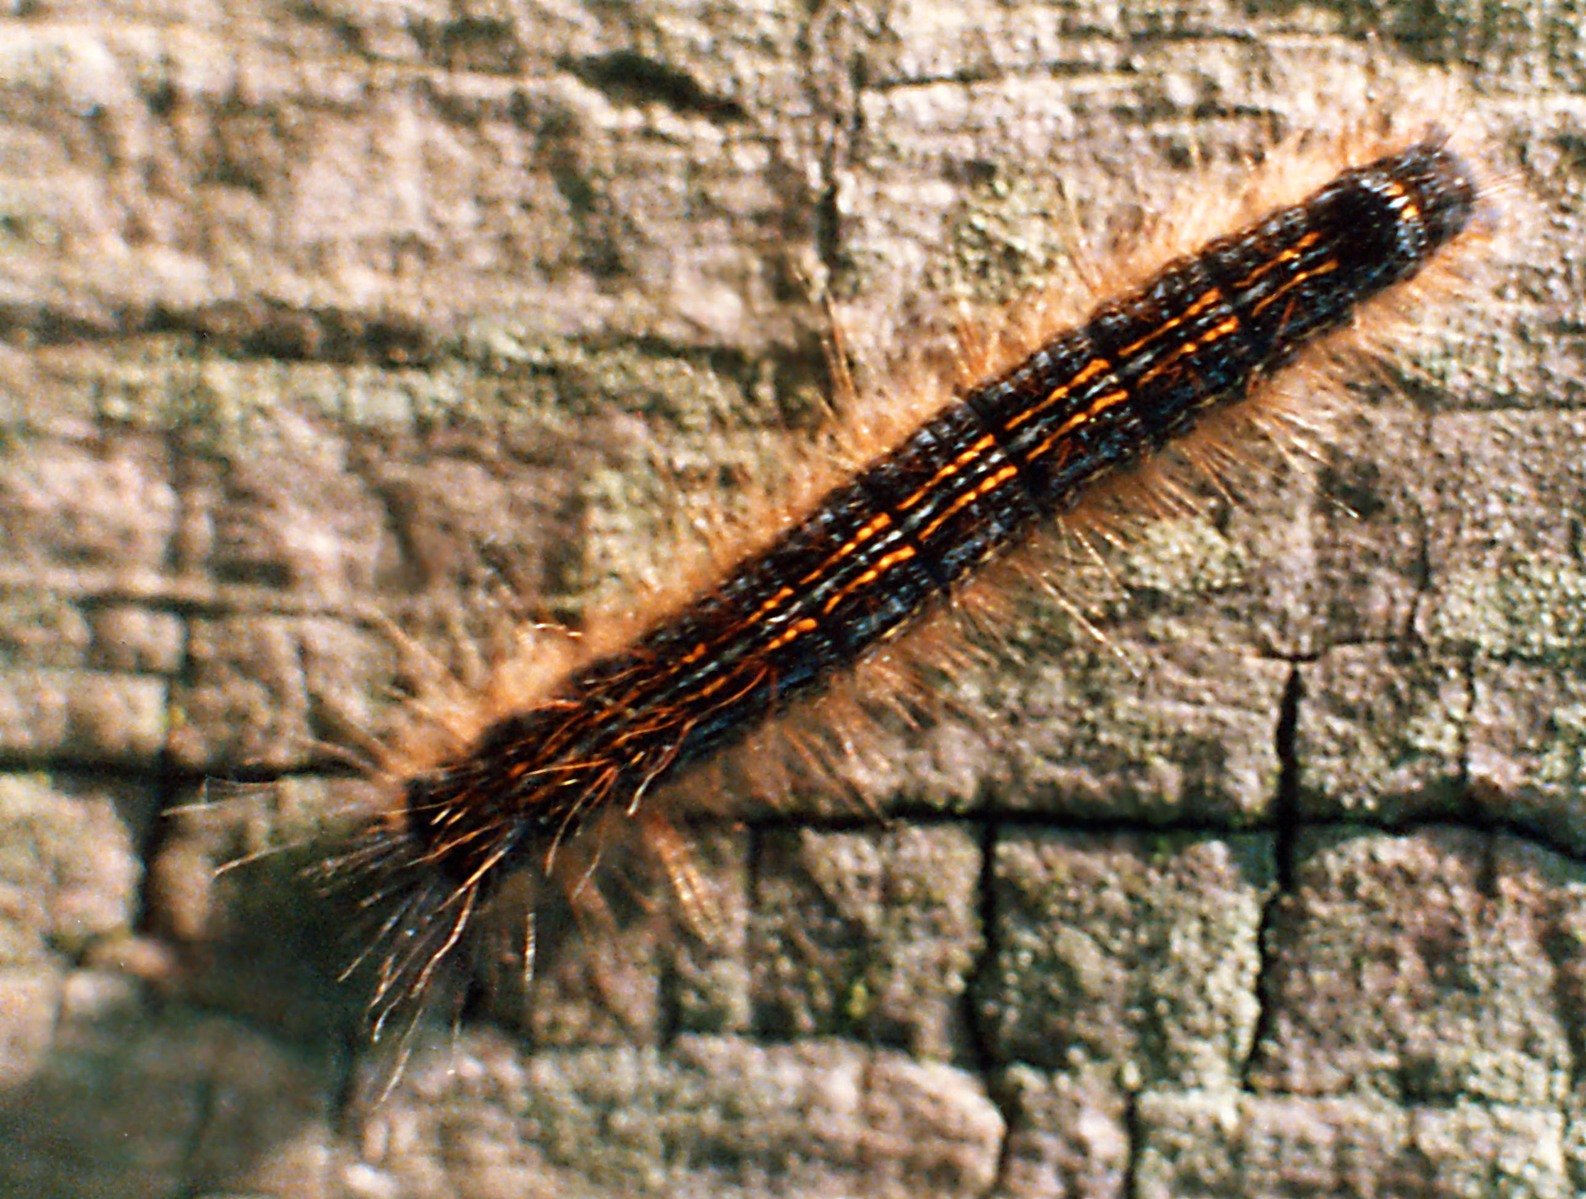 a big caterpillar laying on a wooden surface